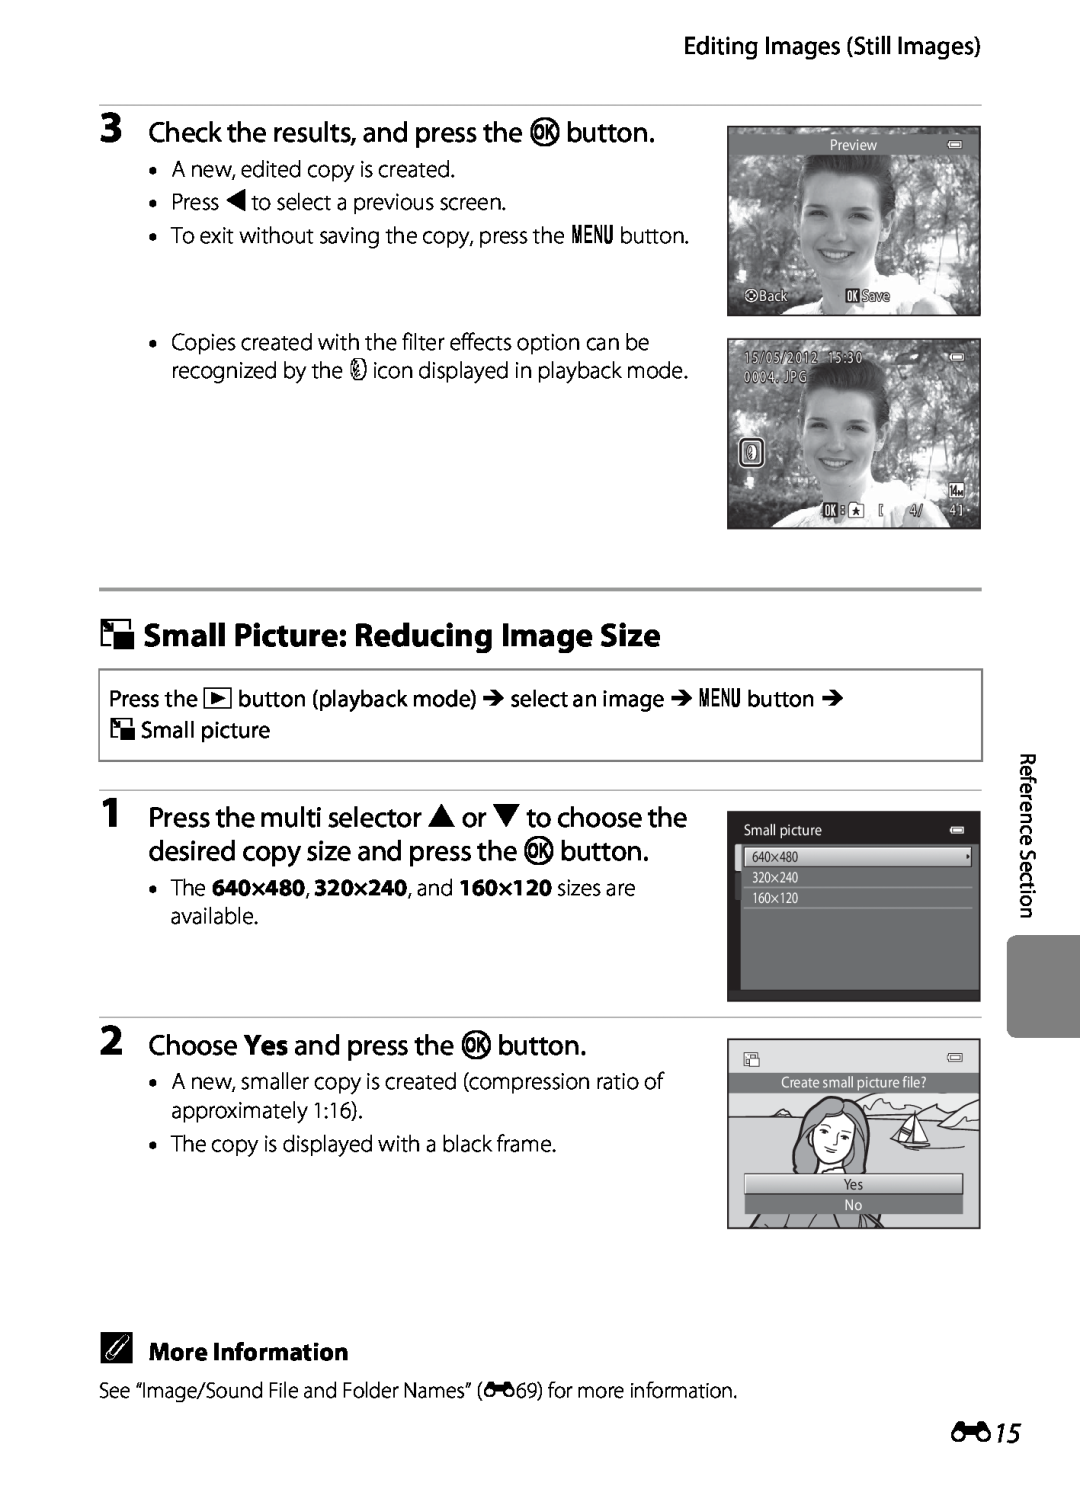 Nikon S2600 gSmall Picture Reducing Image Size, Check the results, and press the kbutton, Choose Yes and press the kbutton 